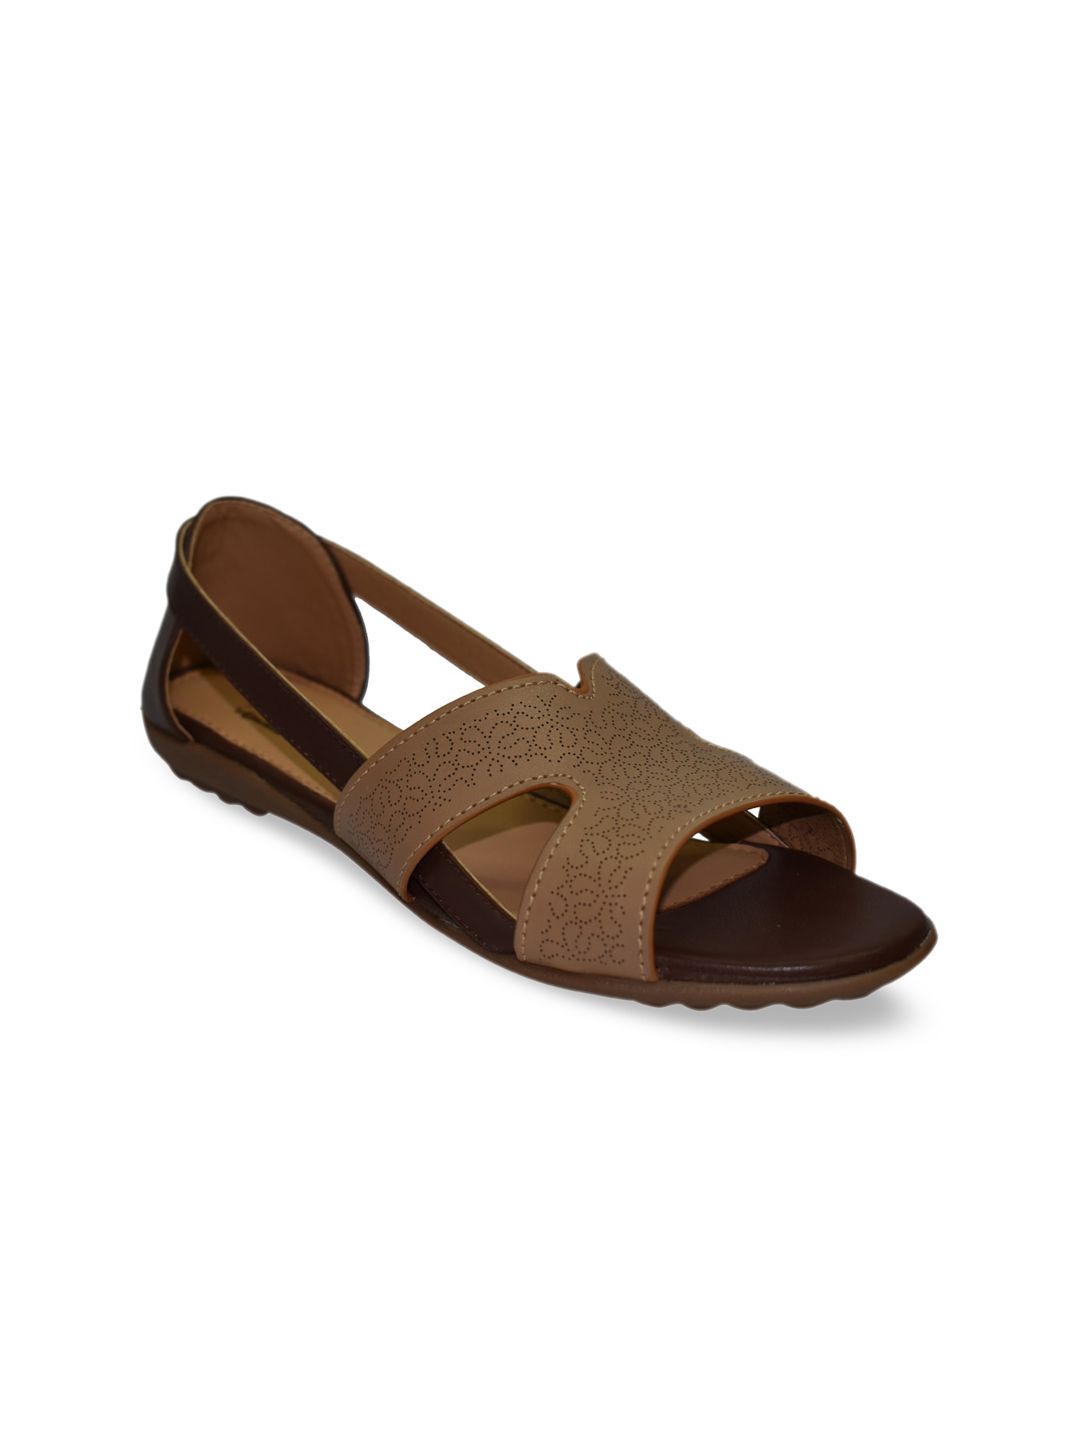 Ajanta Women Beige & Brown Open Toe Flats with Laser Cuts Price in India